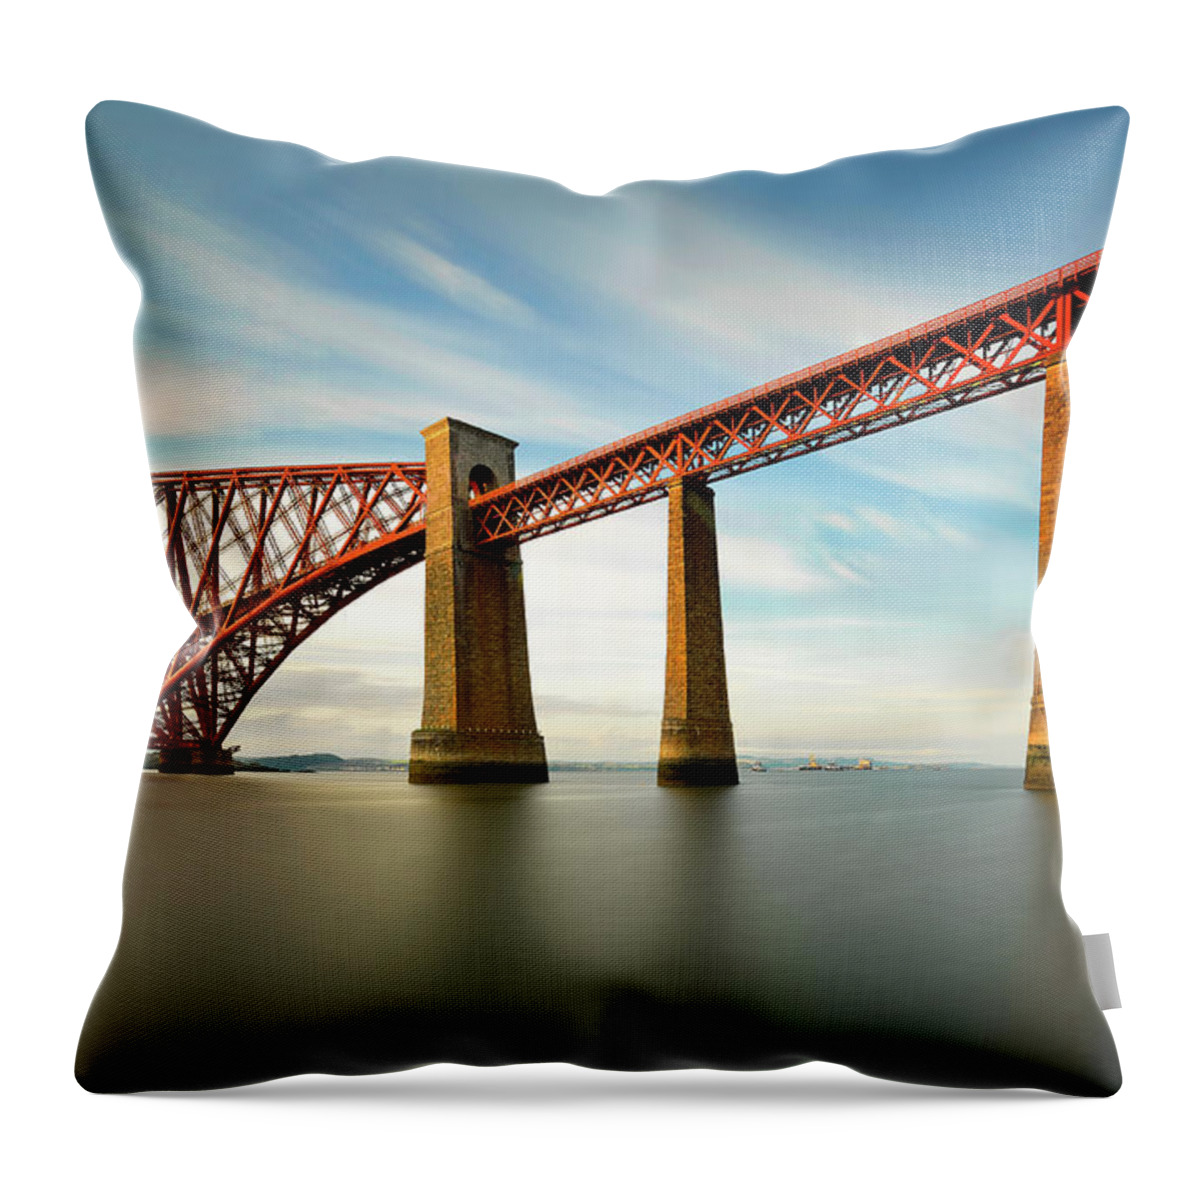 Forth Throw Pillow featuring the photograph The Forth Bridge by Jan Sieminski